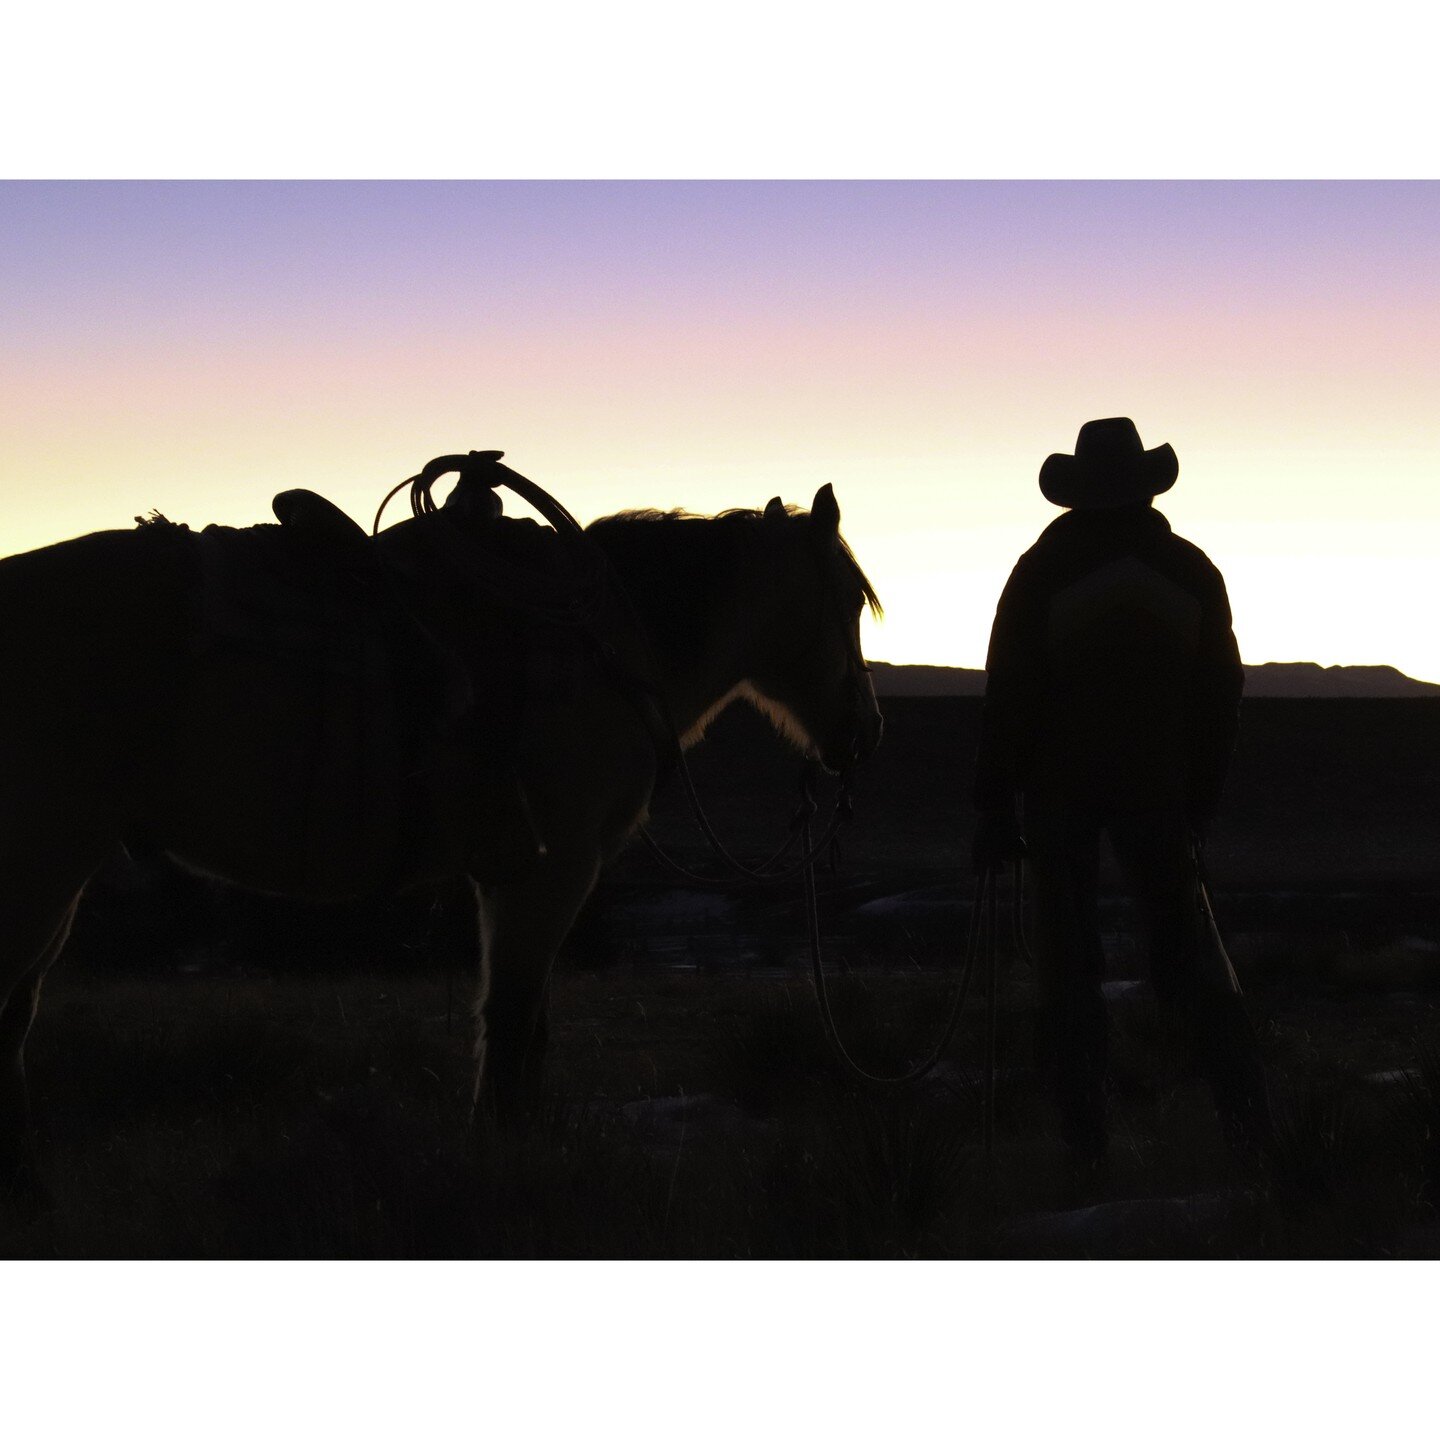 I had a phenomenal (and finger freezing) morning on a Westcliffe ranch, photographing horses and cowgirls as the sun rose.

#westcliffe #sunrise #cowgirl #wrangler #horses #coloradohorses #coloradophotographer